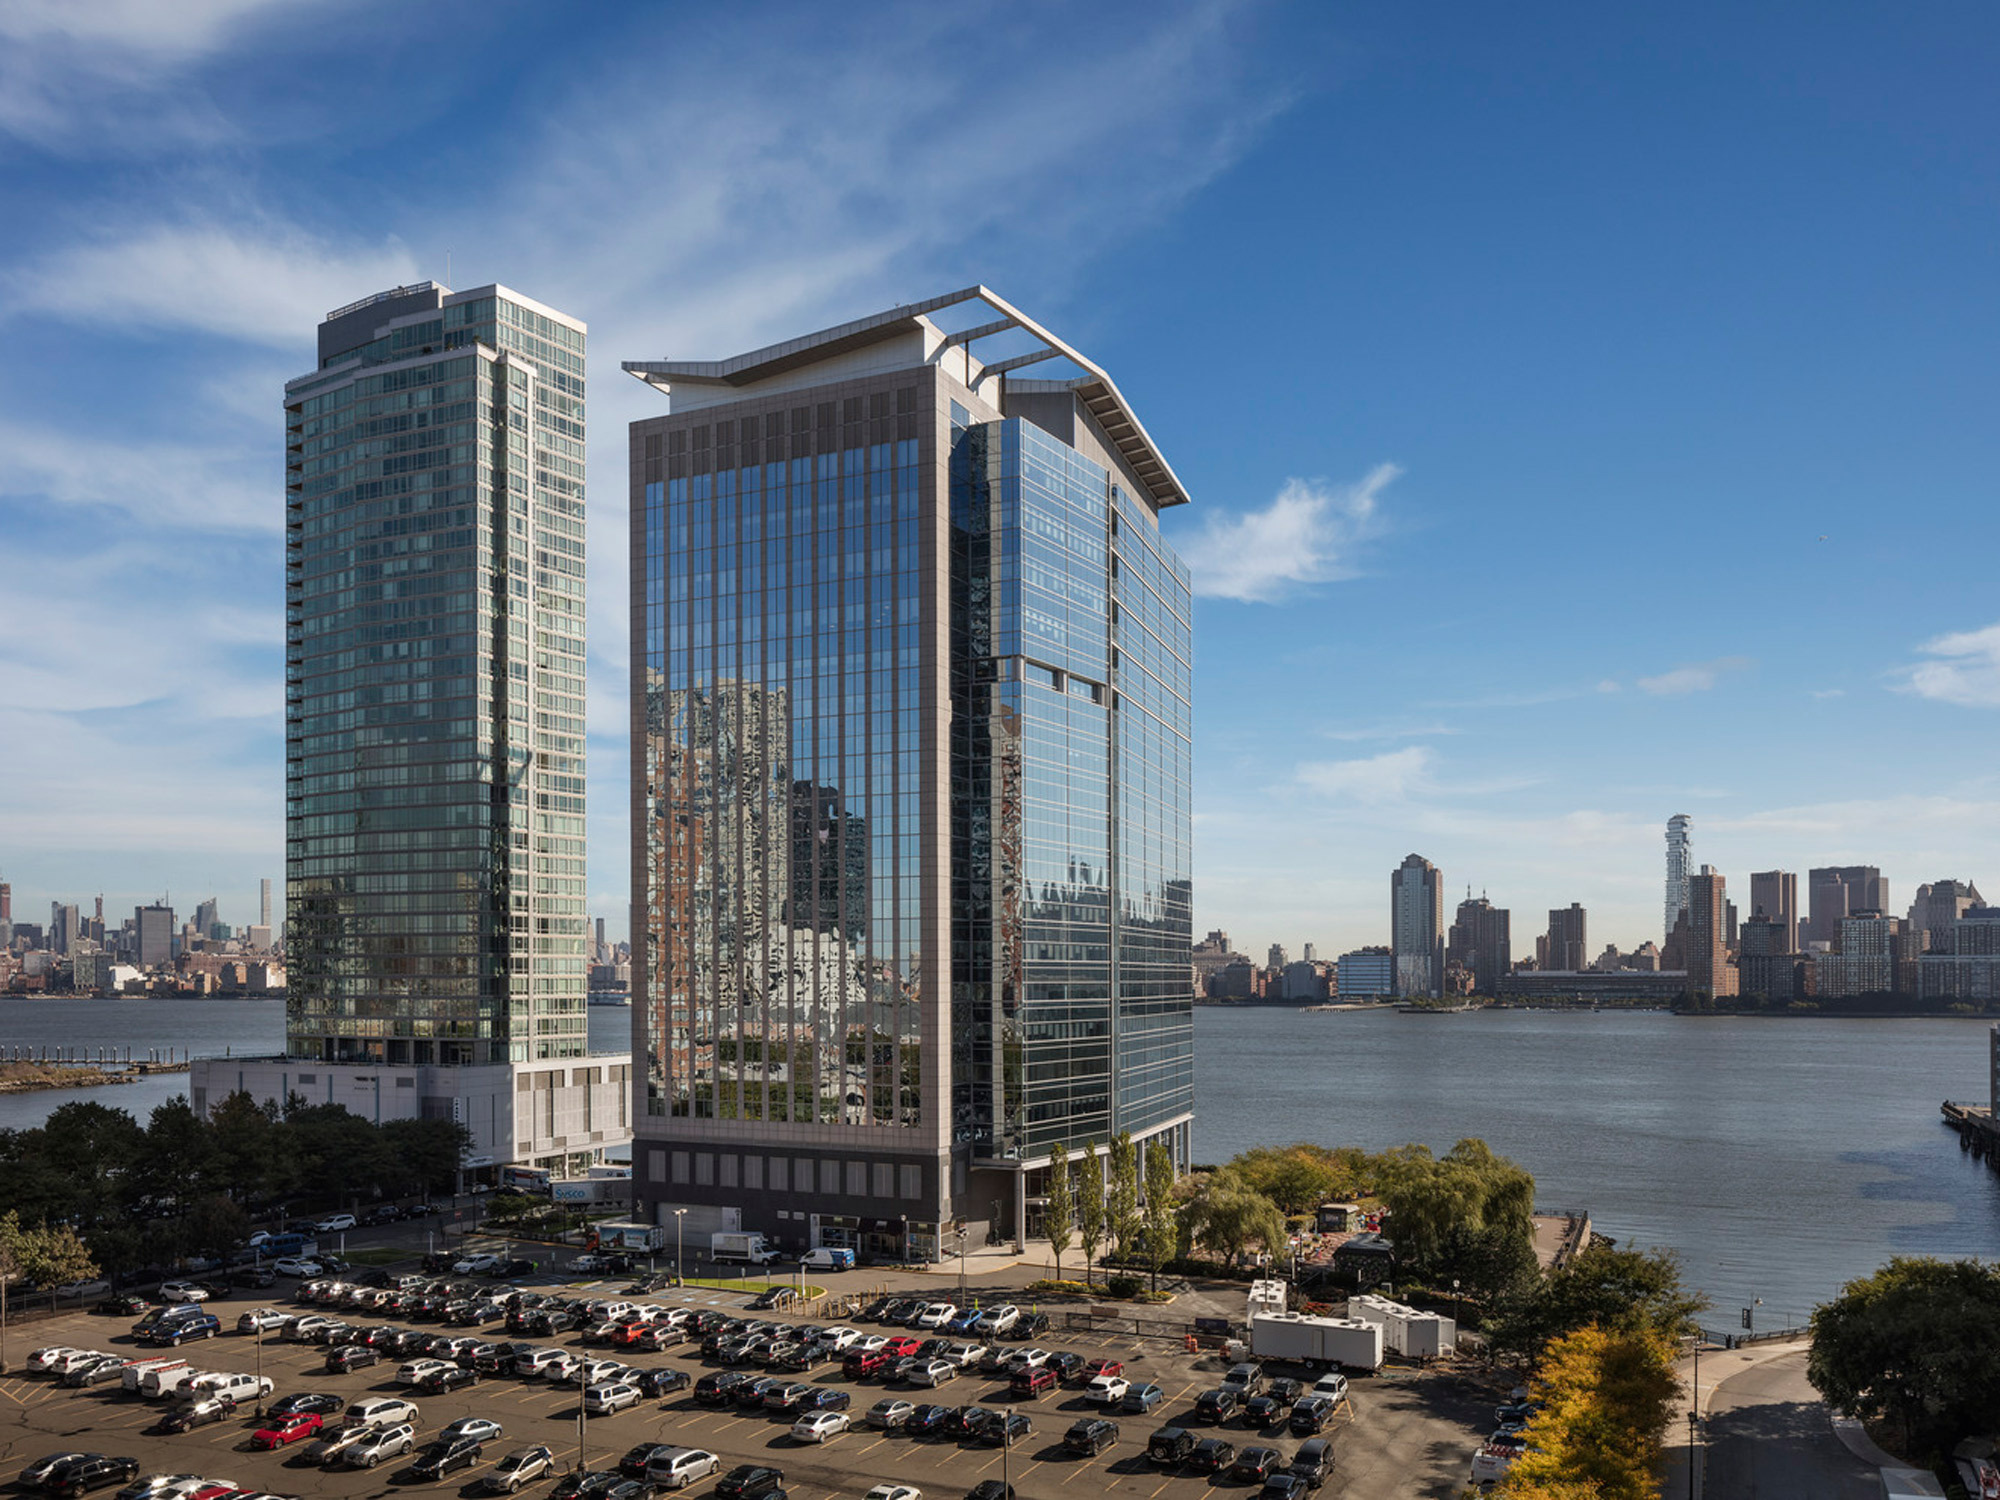 Modern waterfront skyscrapers with reflective glass facades, showcasing a blend of residential and commercial architecture against a clear blue sky.